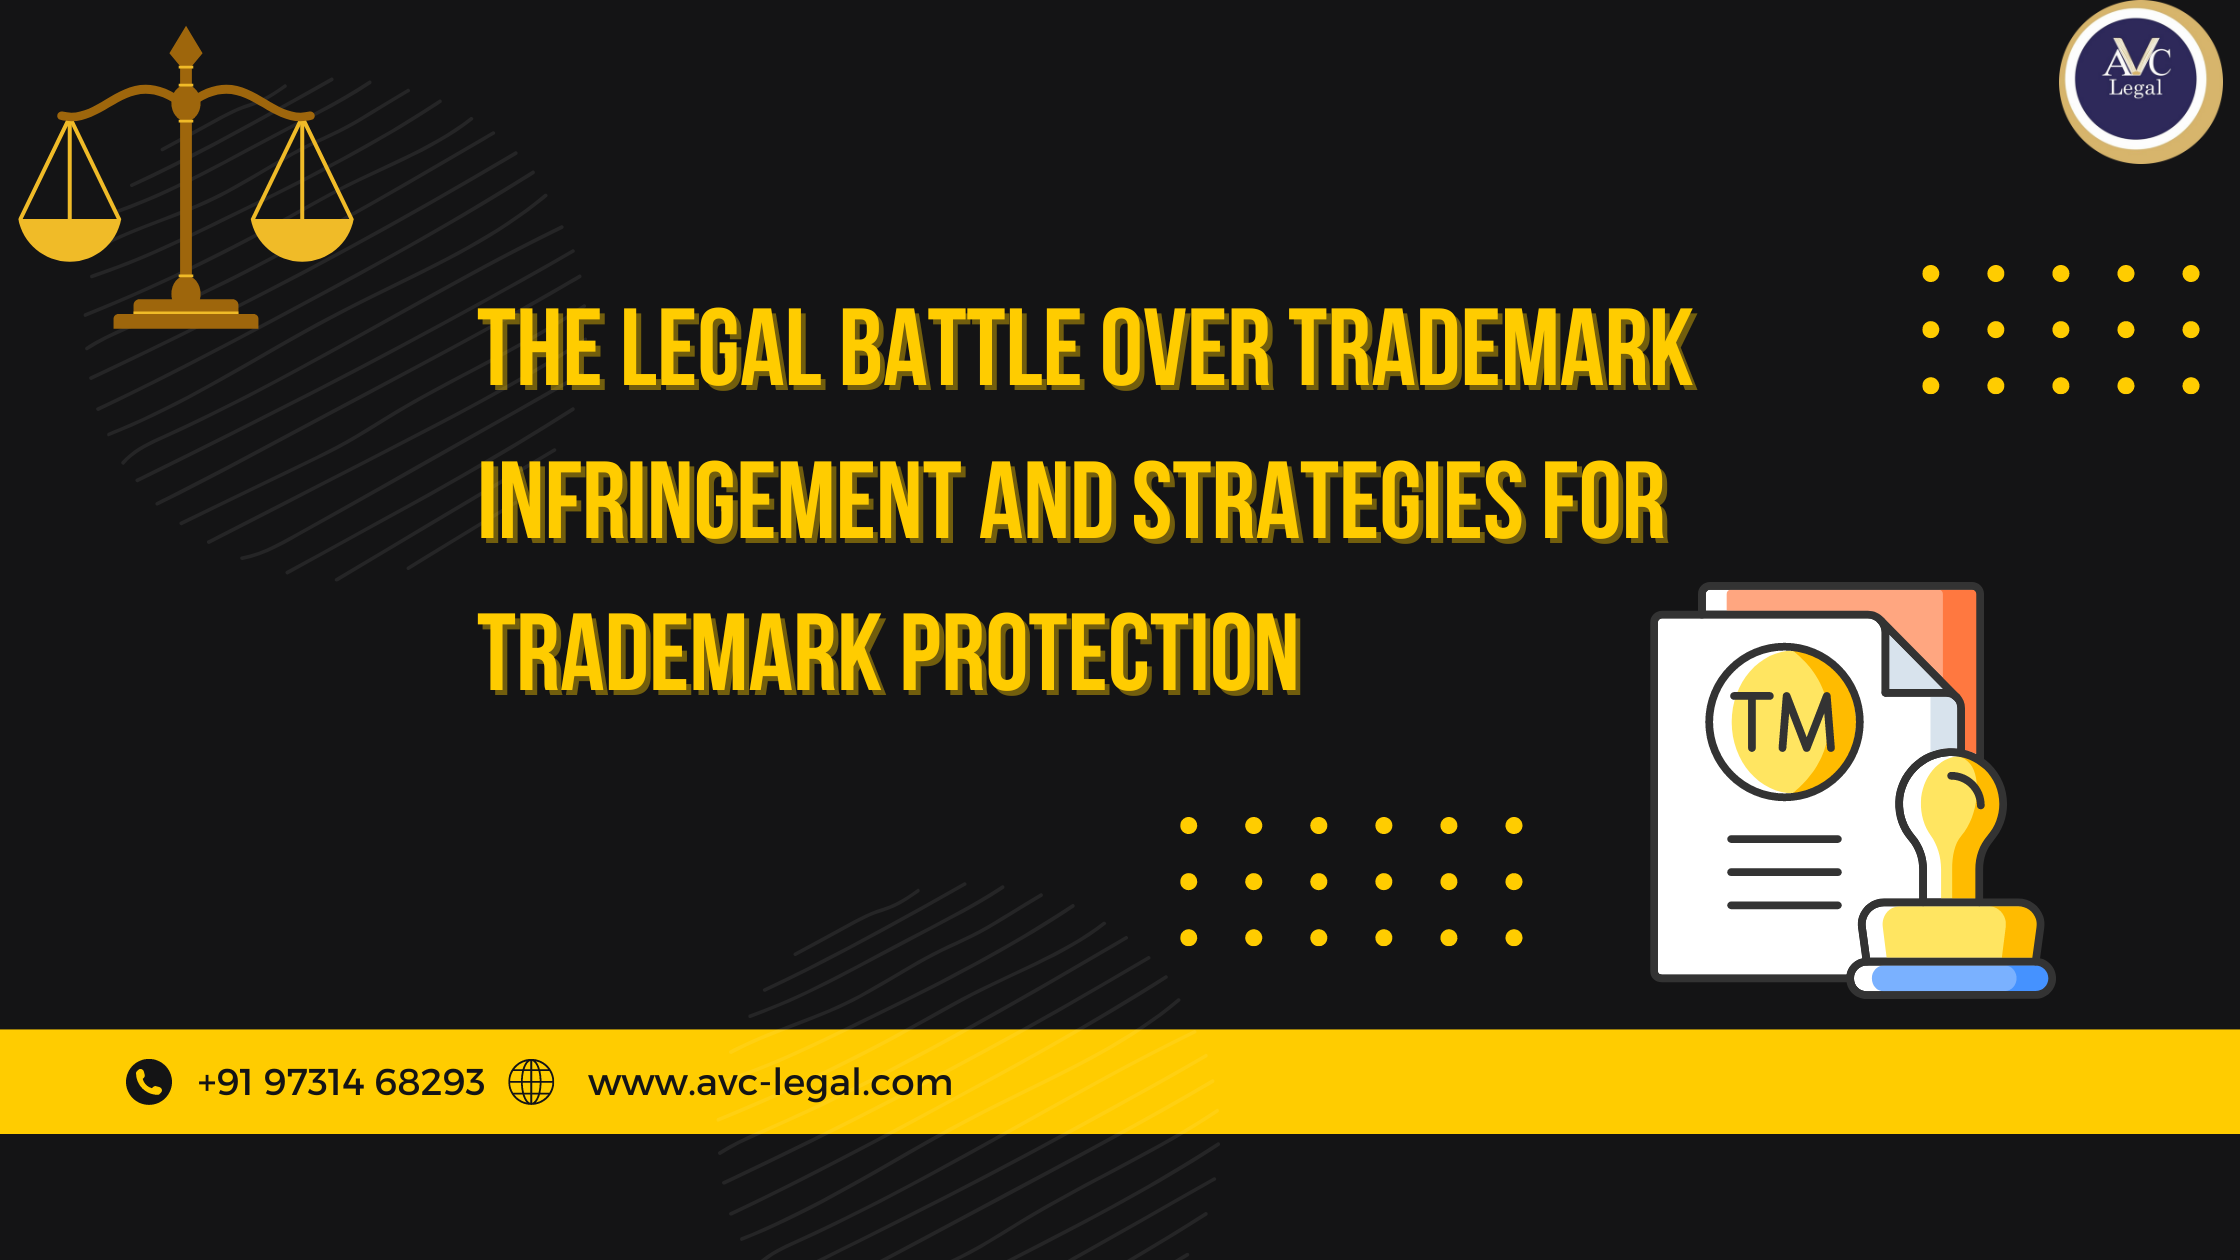 The Legal Battle Over Trademark Infringement and Strategies for Trademark Protection